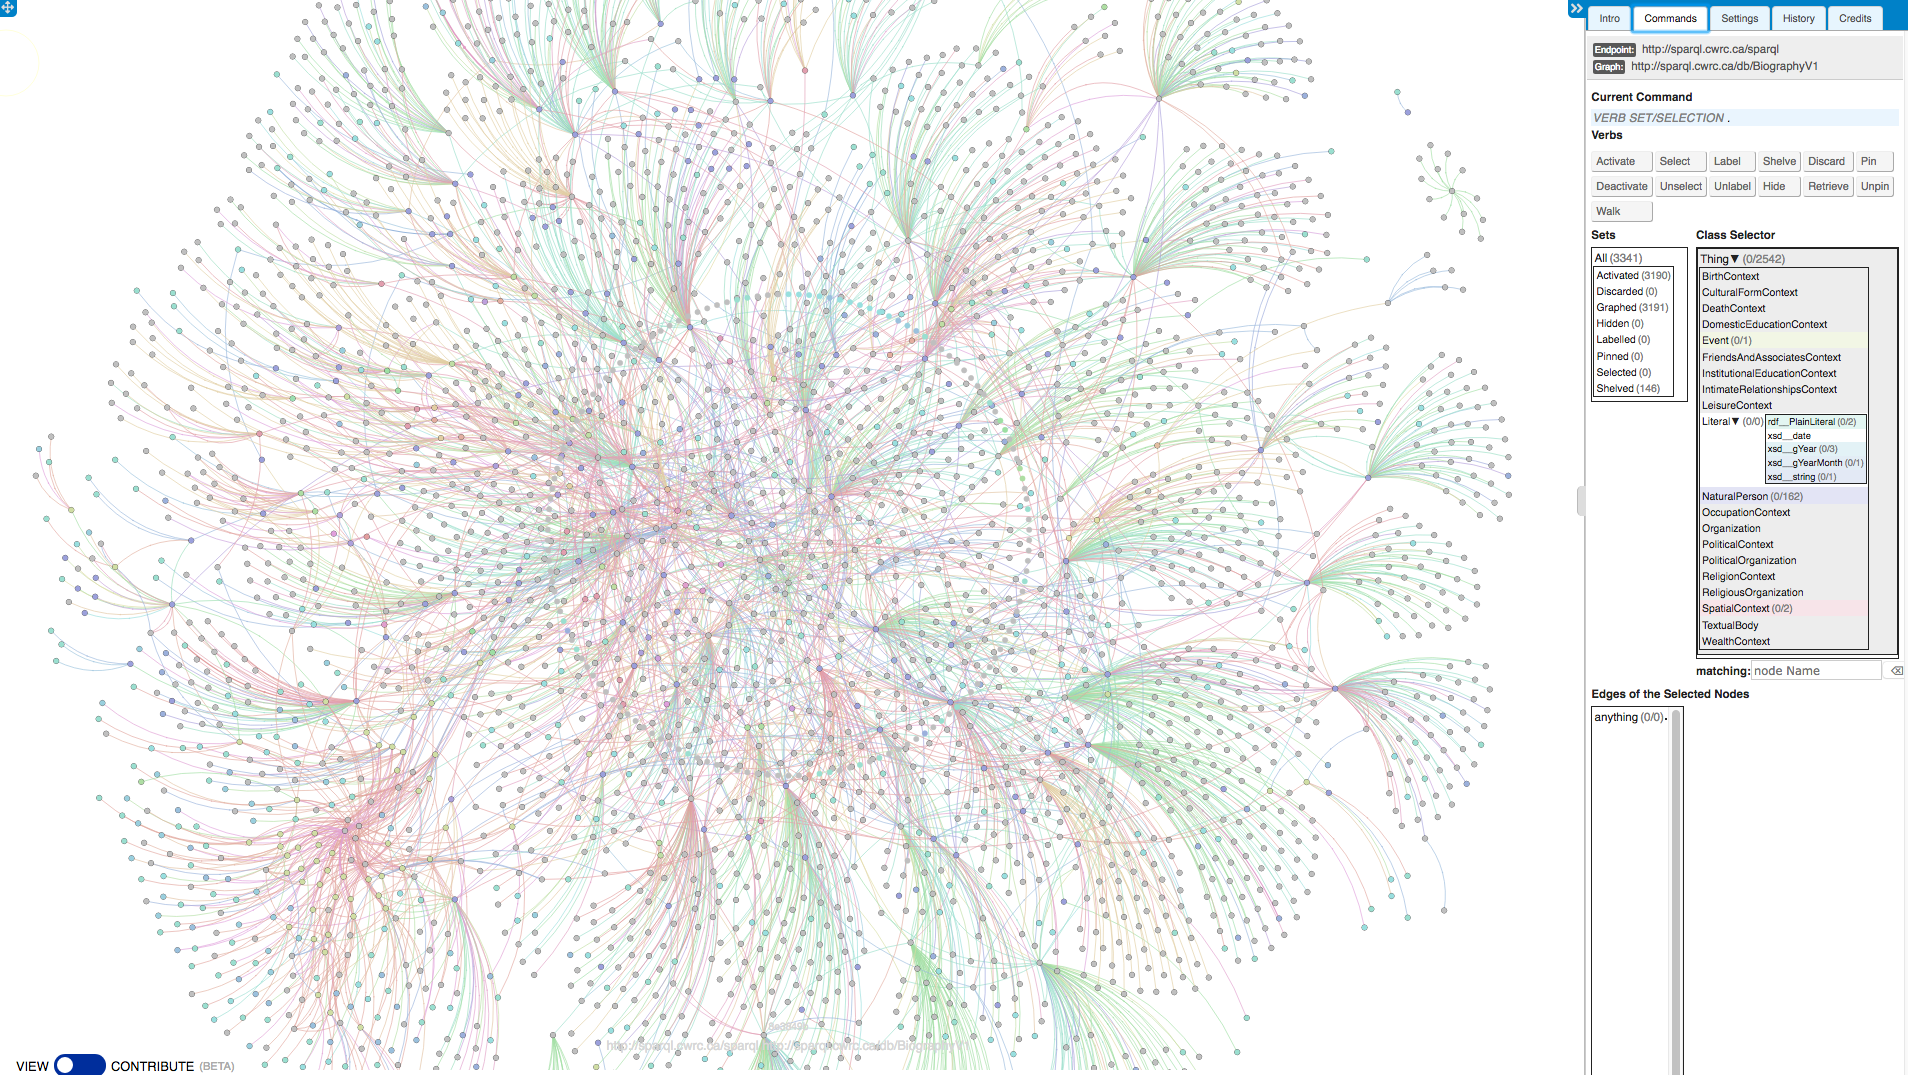 Graph of 3191 nodes pulled from CWRC SPARQL